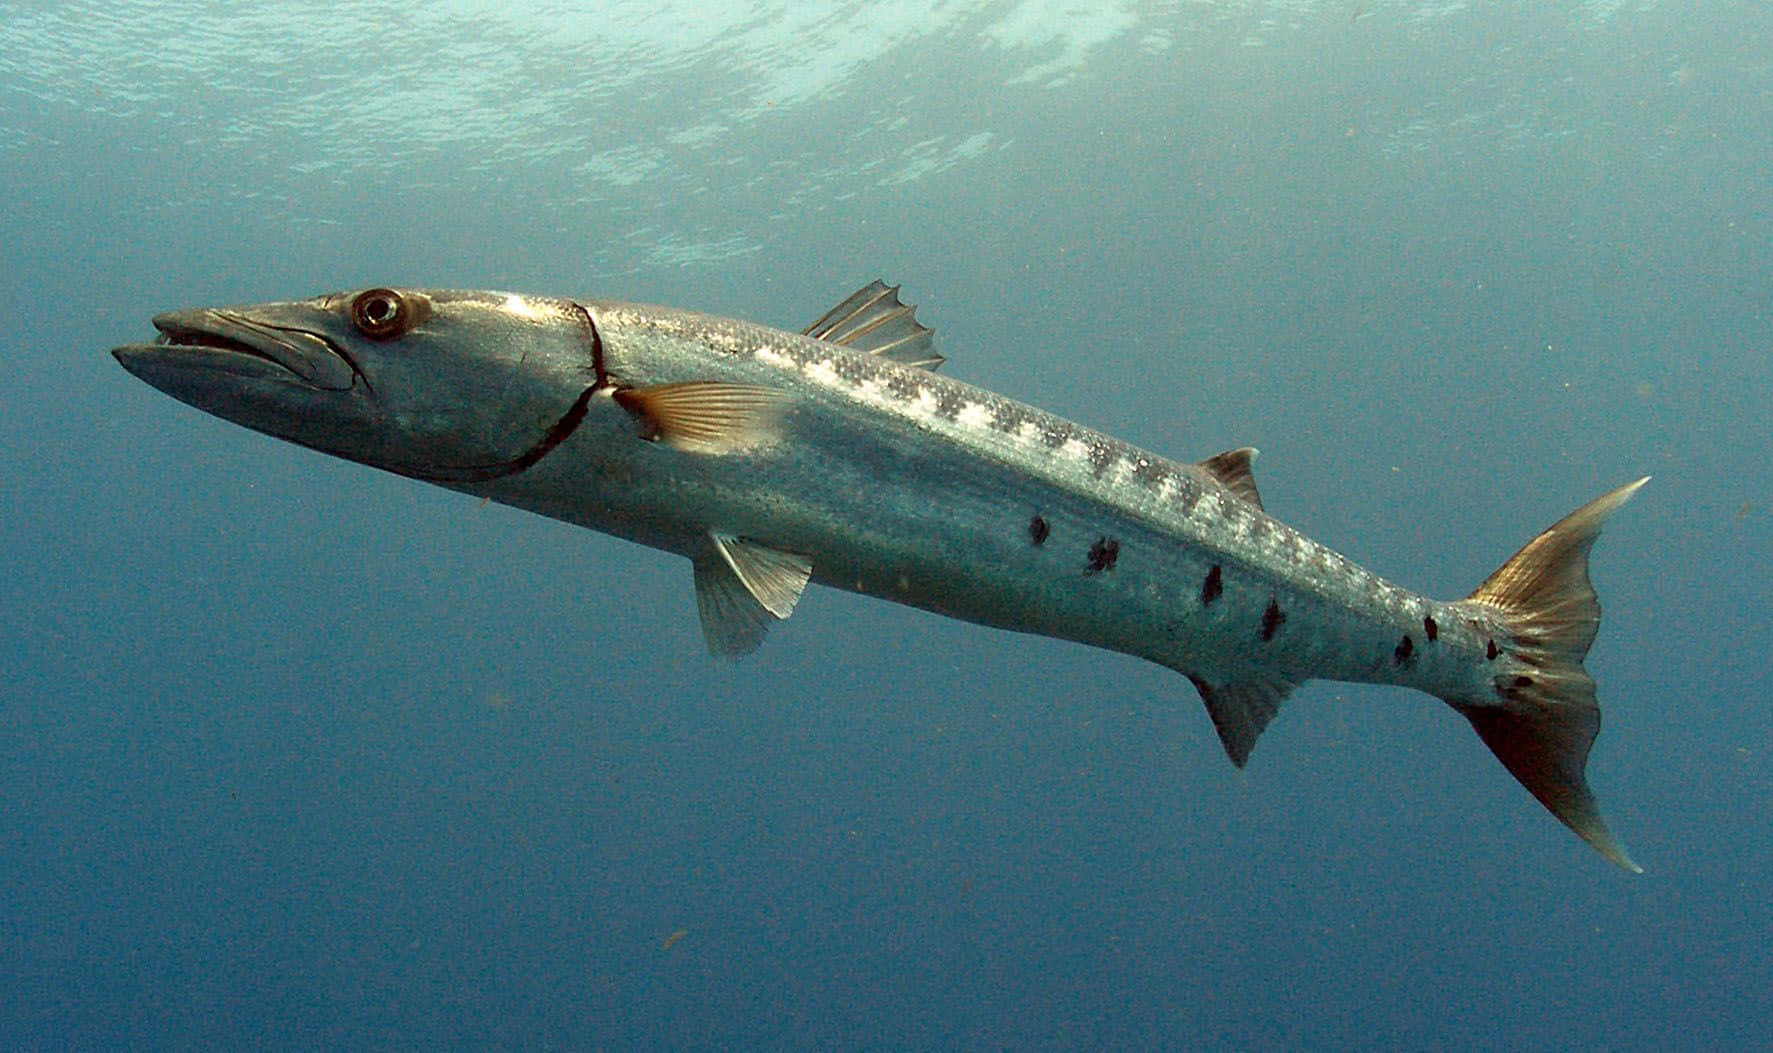 "a Close-up View Of A Stunning Barracuda In Its Natural Underwater Habitat." Wallpaper